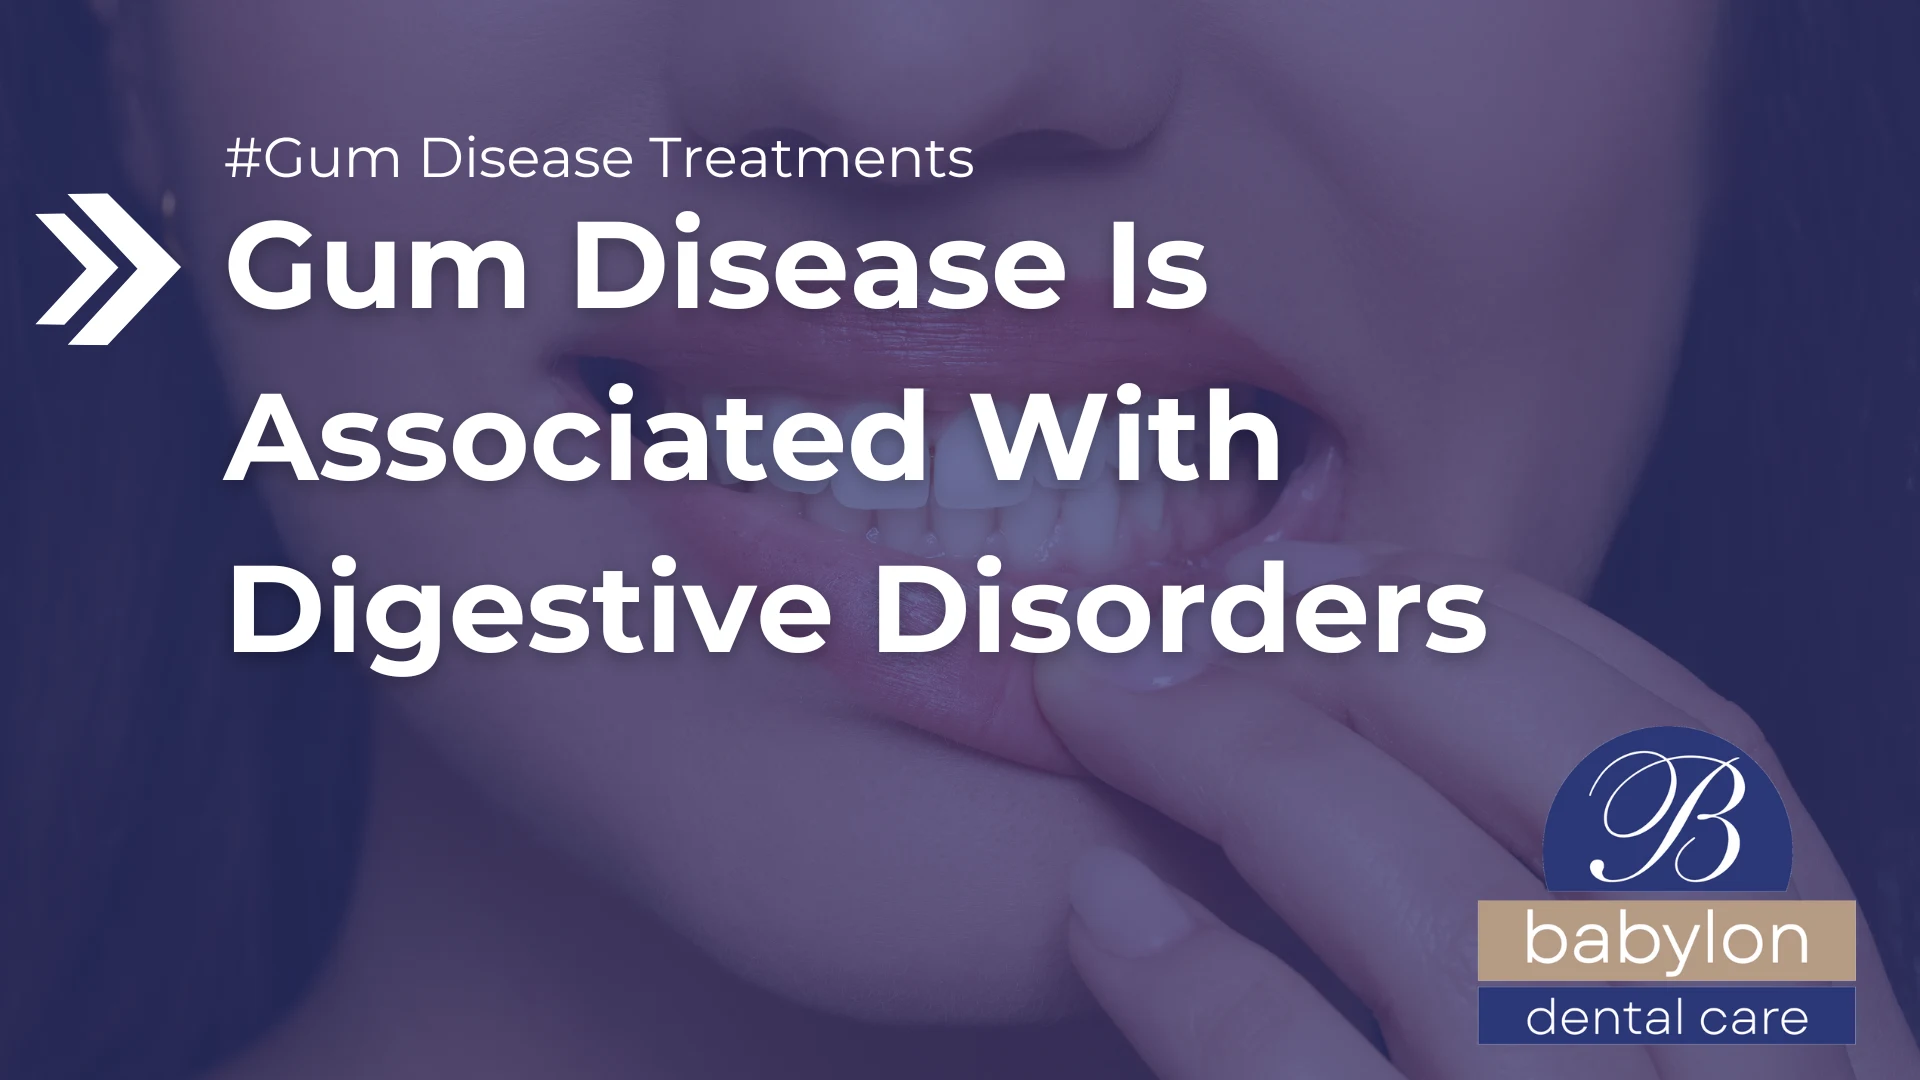 Gum Disease Is Associated With Digestive Disorders Image - new logo